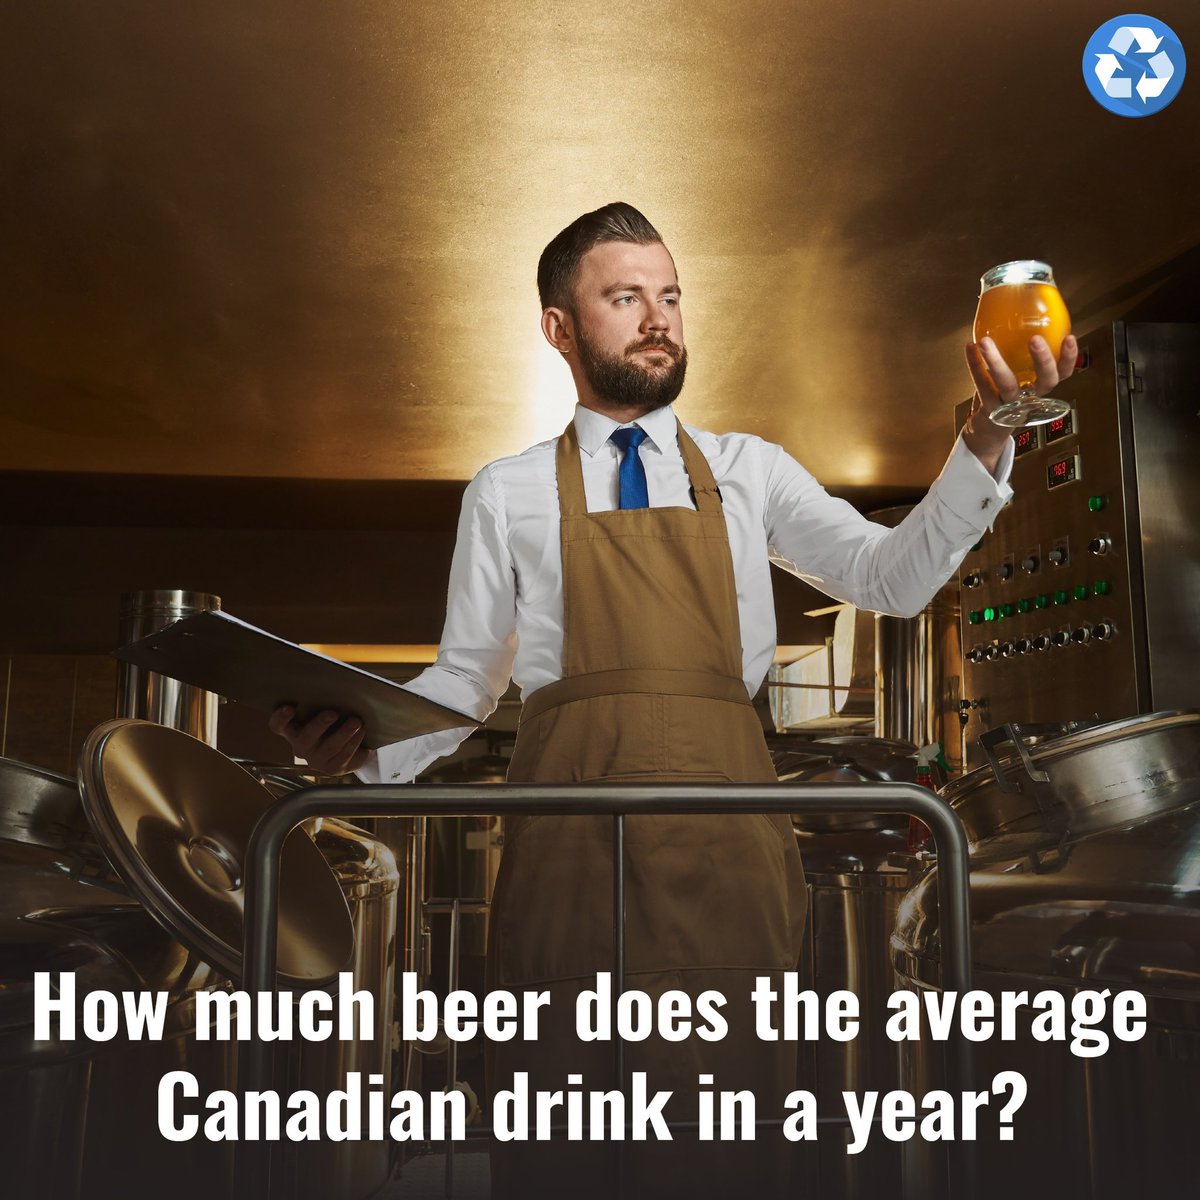 The average Canadian drinks 79 litres of beer in a year! 🍻 Canadians drink enough beer to fill at least 900 Olympic-size swimming pools in a year! THAT IS A LOT! 🤯 Don't forget to use SkipTheDepot to make recycling those beer cans even easier! app.skipthedepot.com/register ♻️